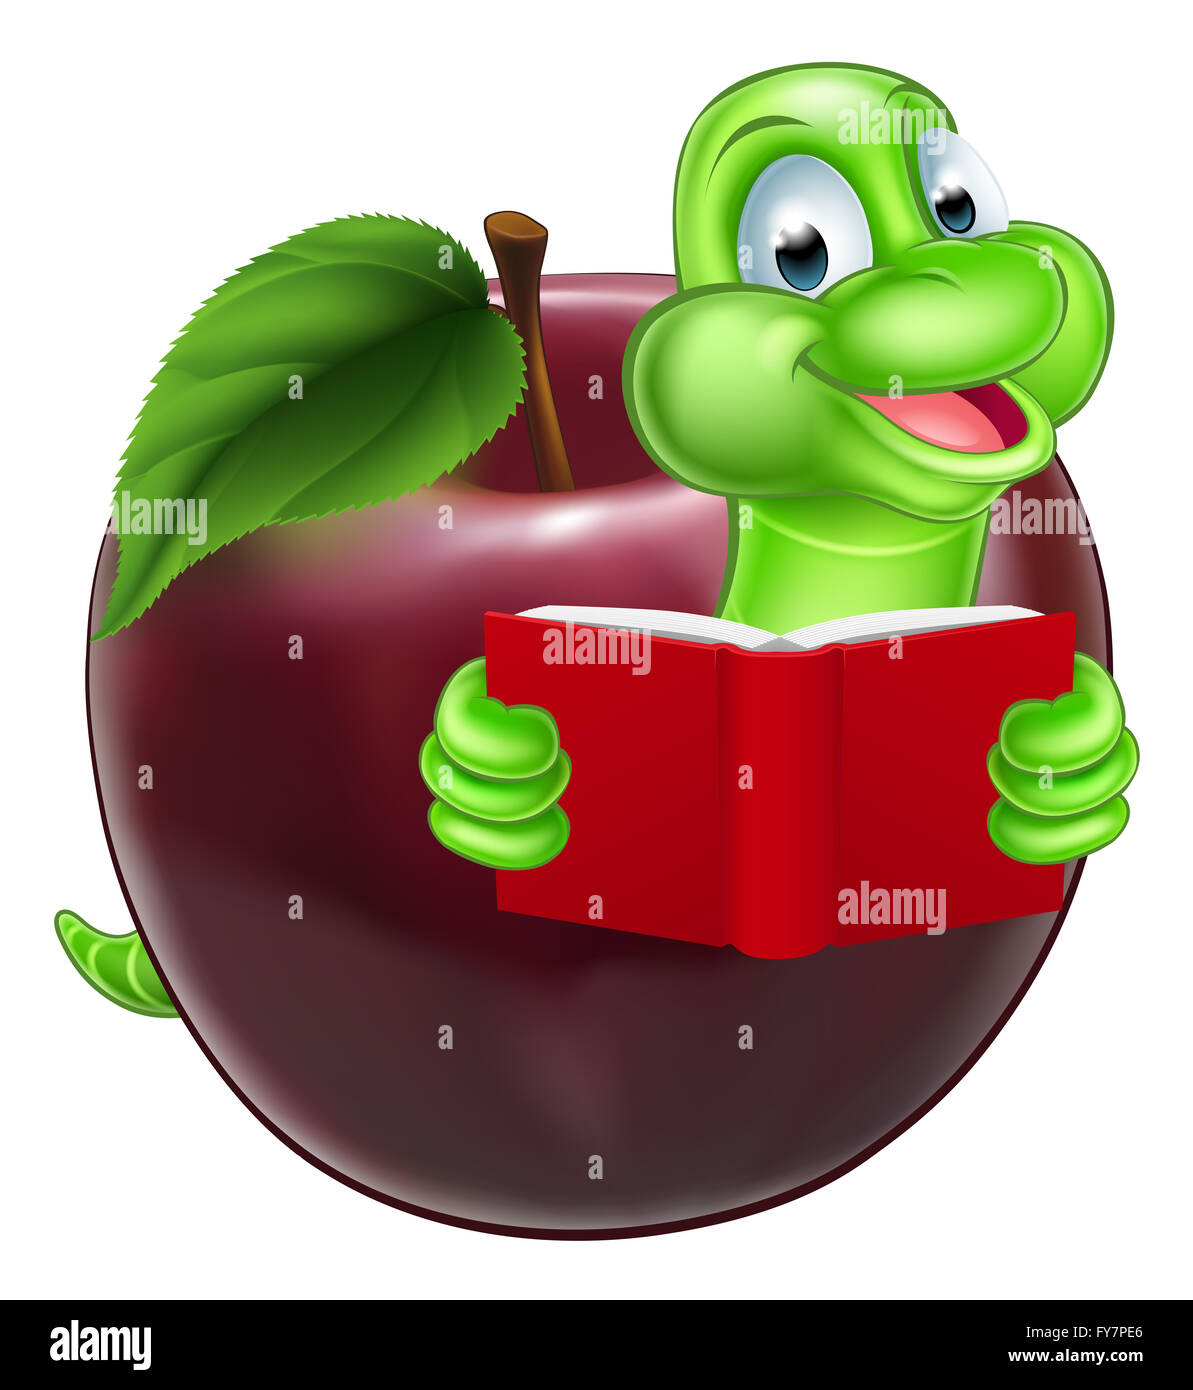 A happy cute cartoon caterpillar bookworm worm or catepillar reading a book and coming out of an apple Stock Photo